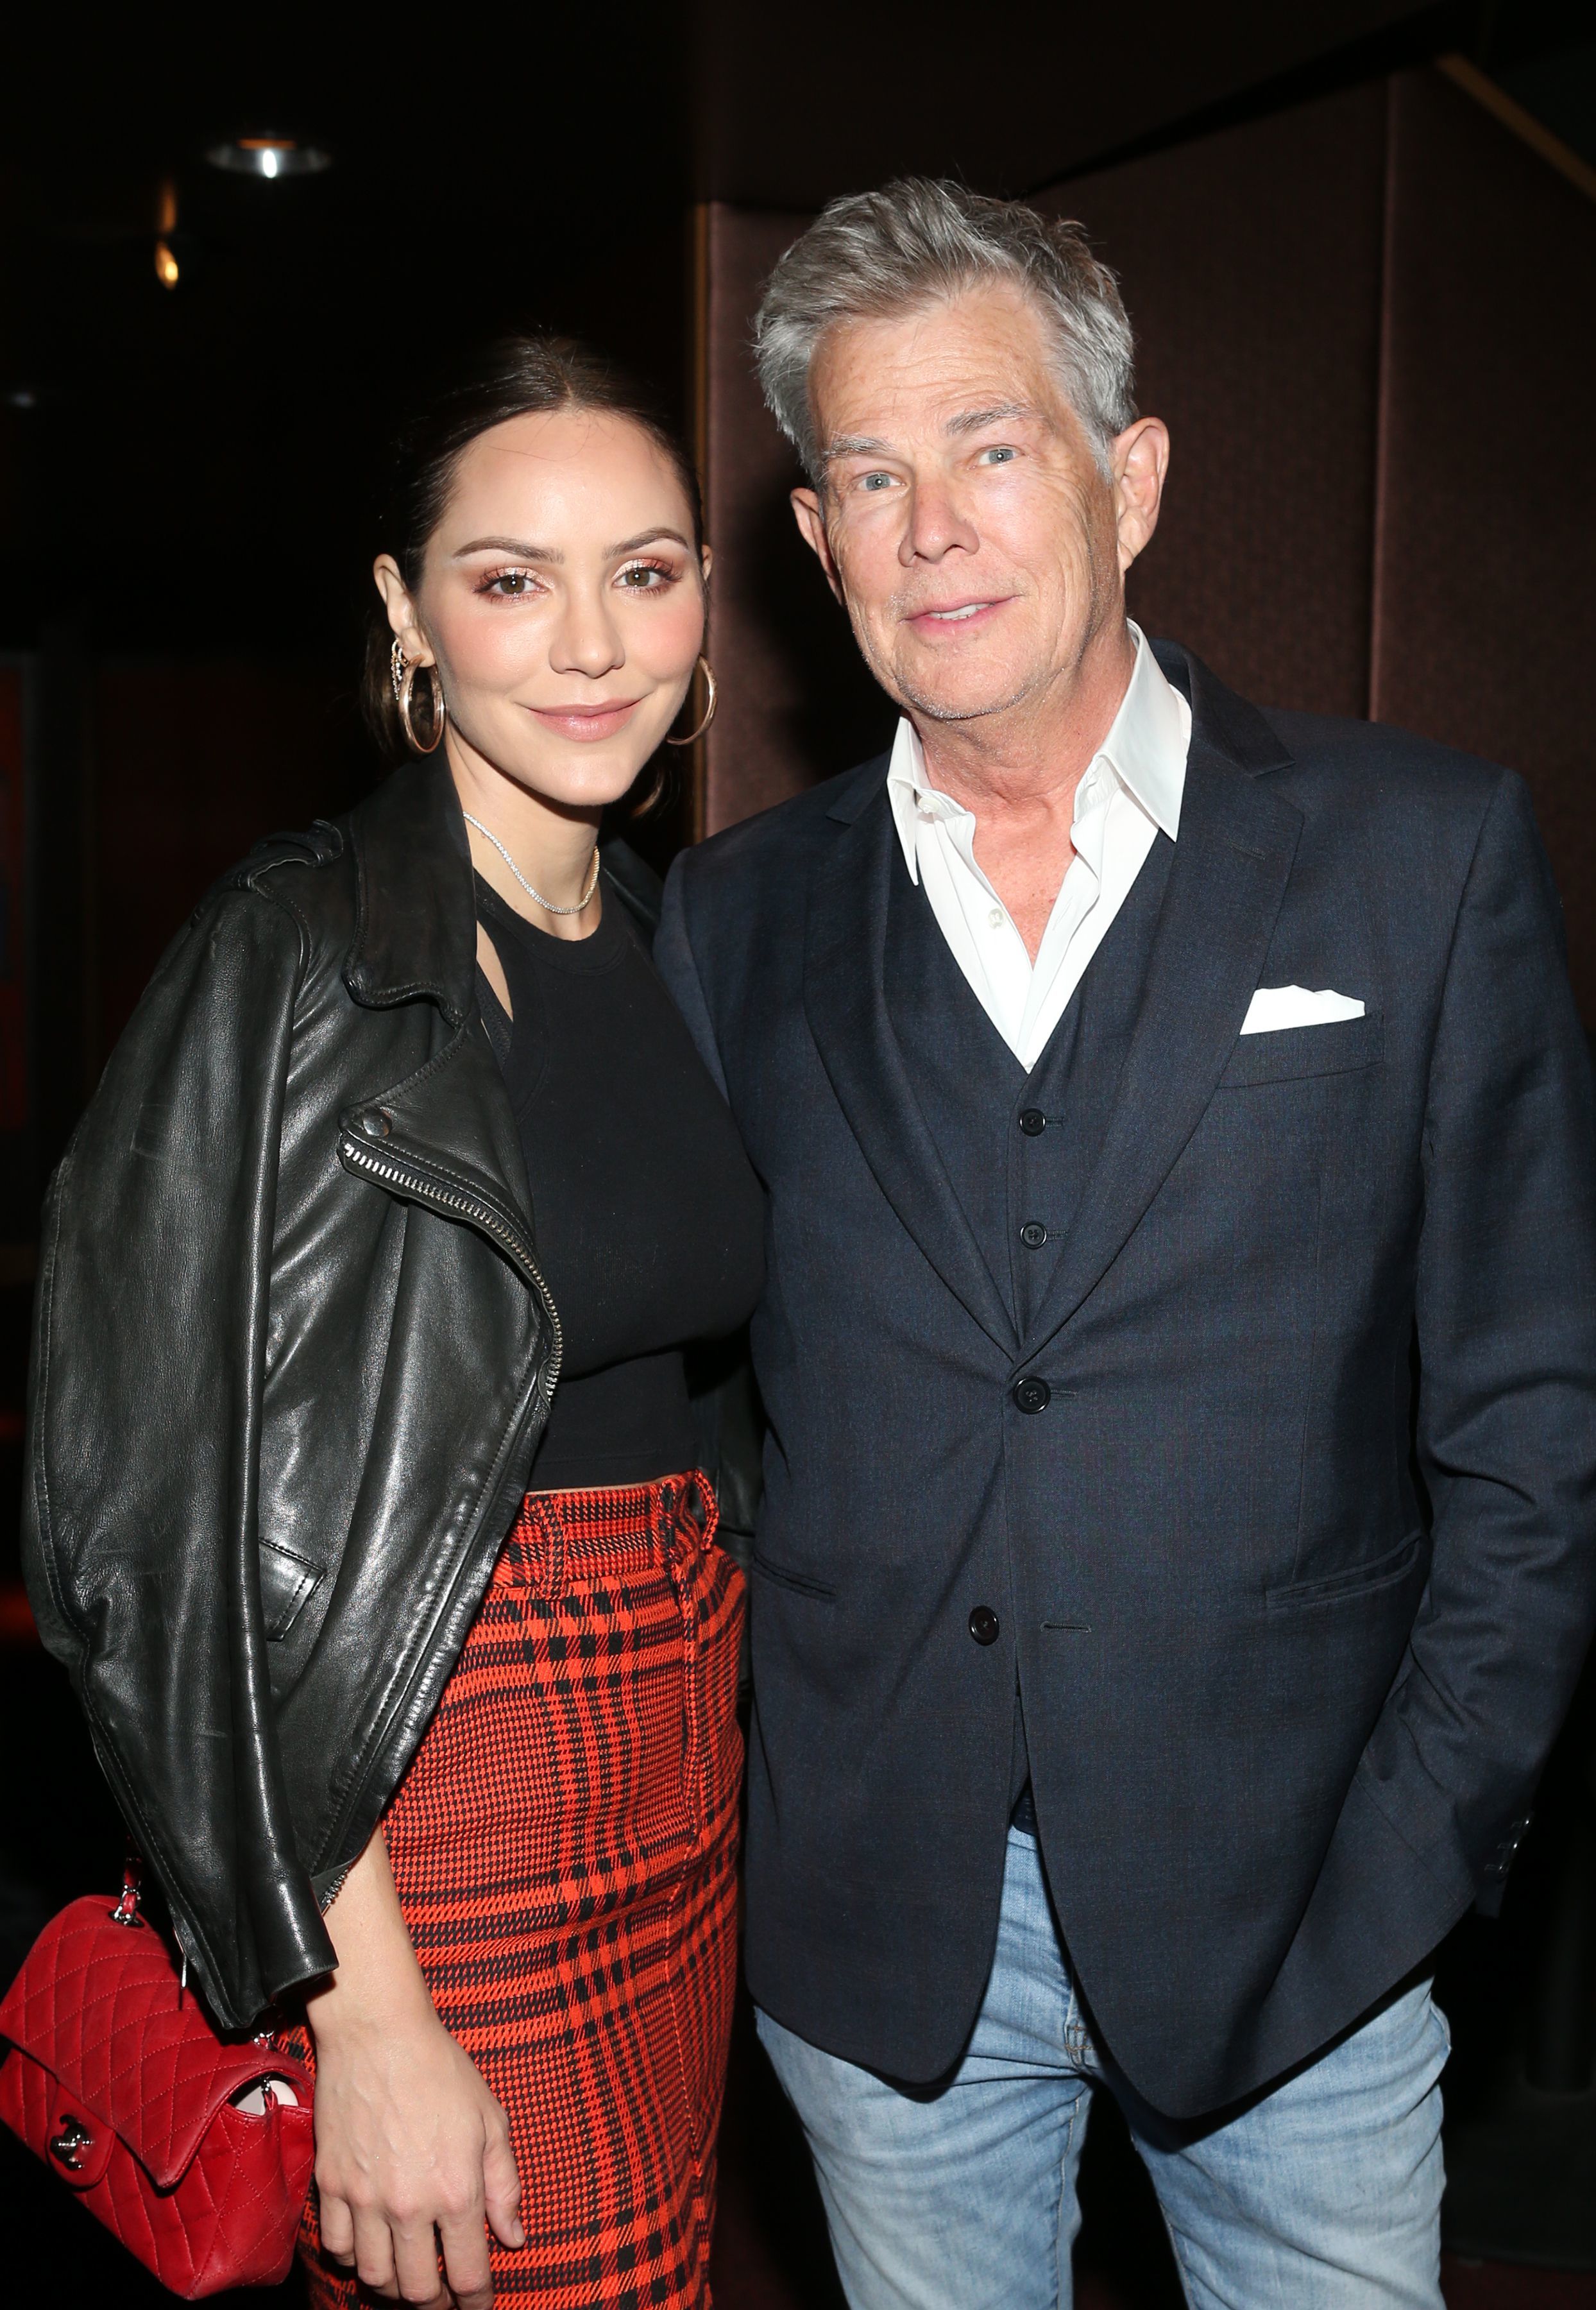 <p>In 2017, reports swirled claiming that David Foster, then 67, and Katharine McPhee, then 32, were <a href="http://www.wonderwall.com/news/david-foster-and-kat-mcphee-ignite-romance-rumors-3006667.article">dating</a>, which came as a shock to many, considering their 34-year age difference. However, the musician-producer and the singer-actress didn't let that get in the way of their love. In 2018, they <a href="https://www.wonderwall.com/news/david-foster-68-and-katharine-mcphee-34-are-engaged-3015164.article">got engaged</a> while on vacation in Italy and in 2019, they wed in London. They welcomed their first child together, son Rennie, in 2021.</p>